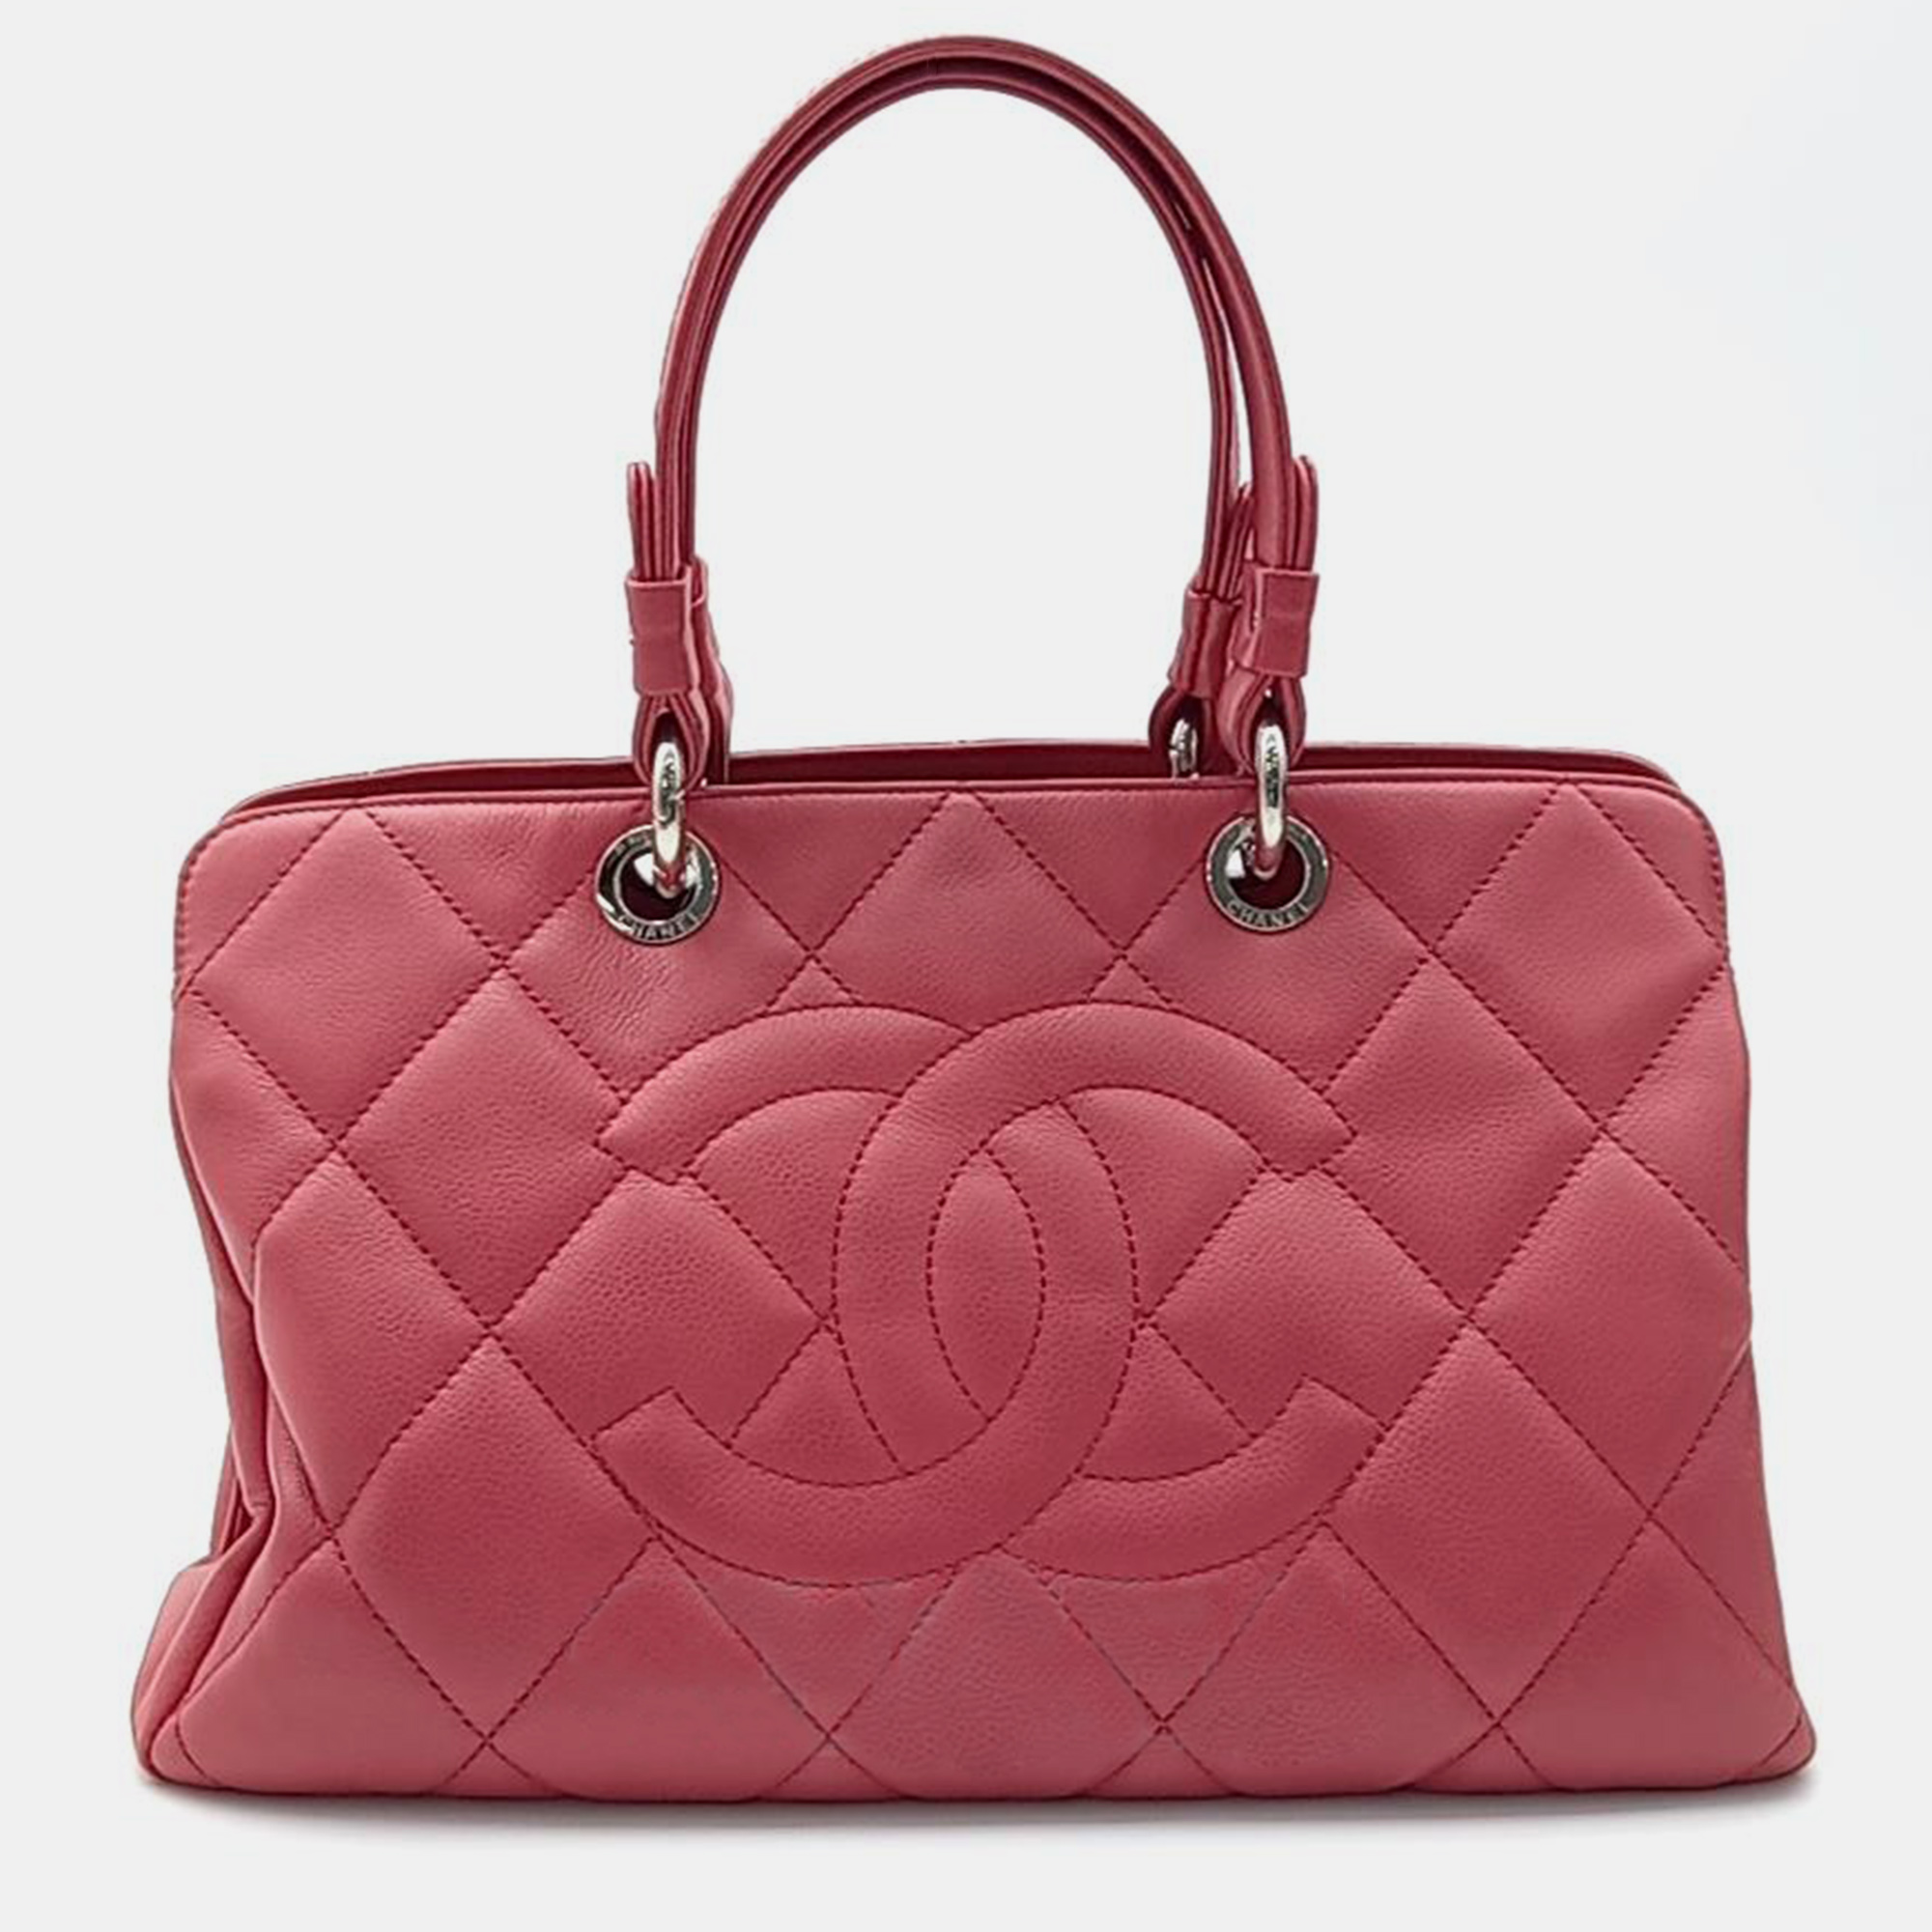 Chanel pink caviar leather tote bag